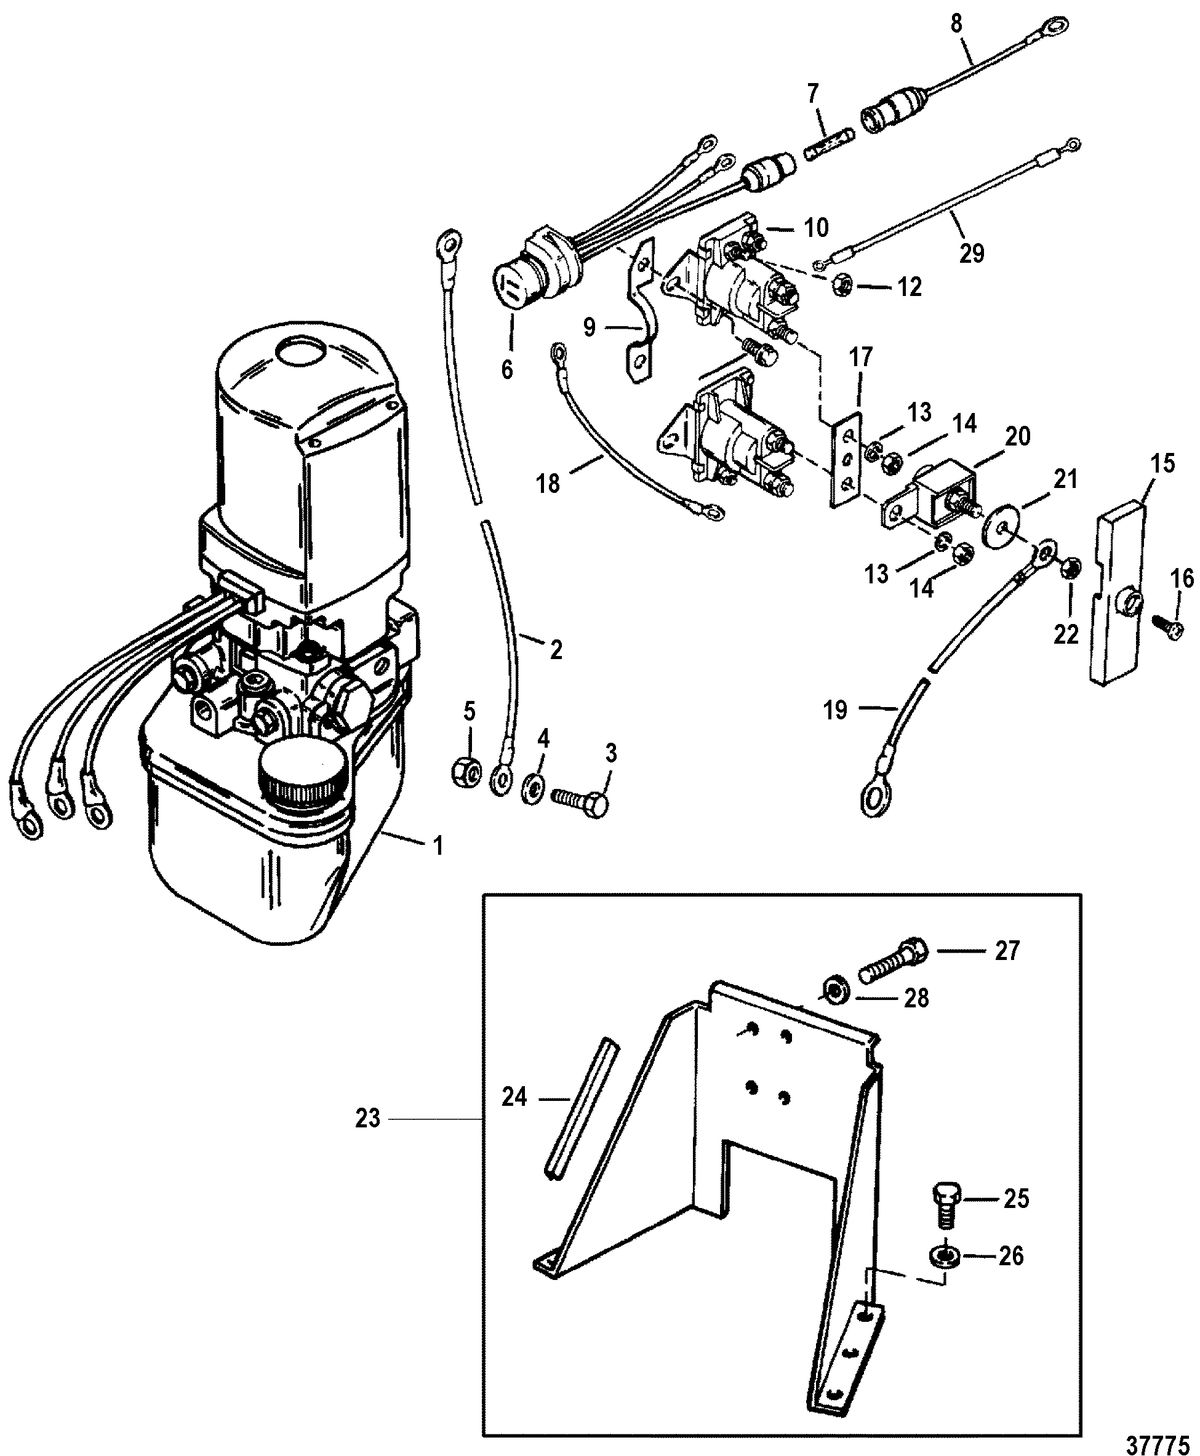 MERCRUISER ALPHA ONE (GEN. II) STERNDRIVE AND TRANSOM ASSEMBLY HYDRAULIC PUMP AND BRACKET